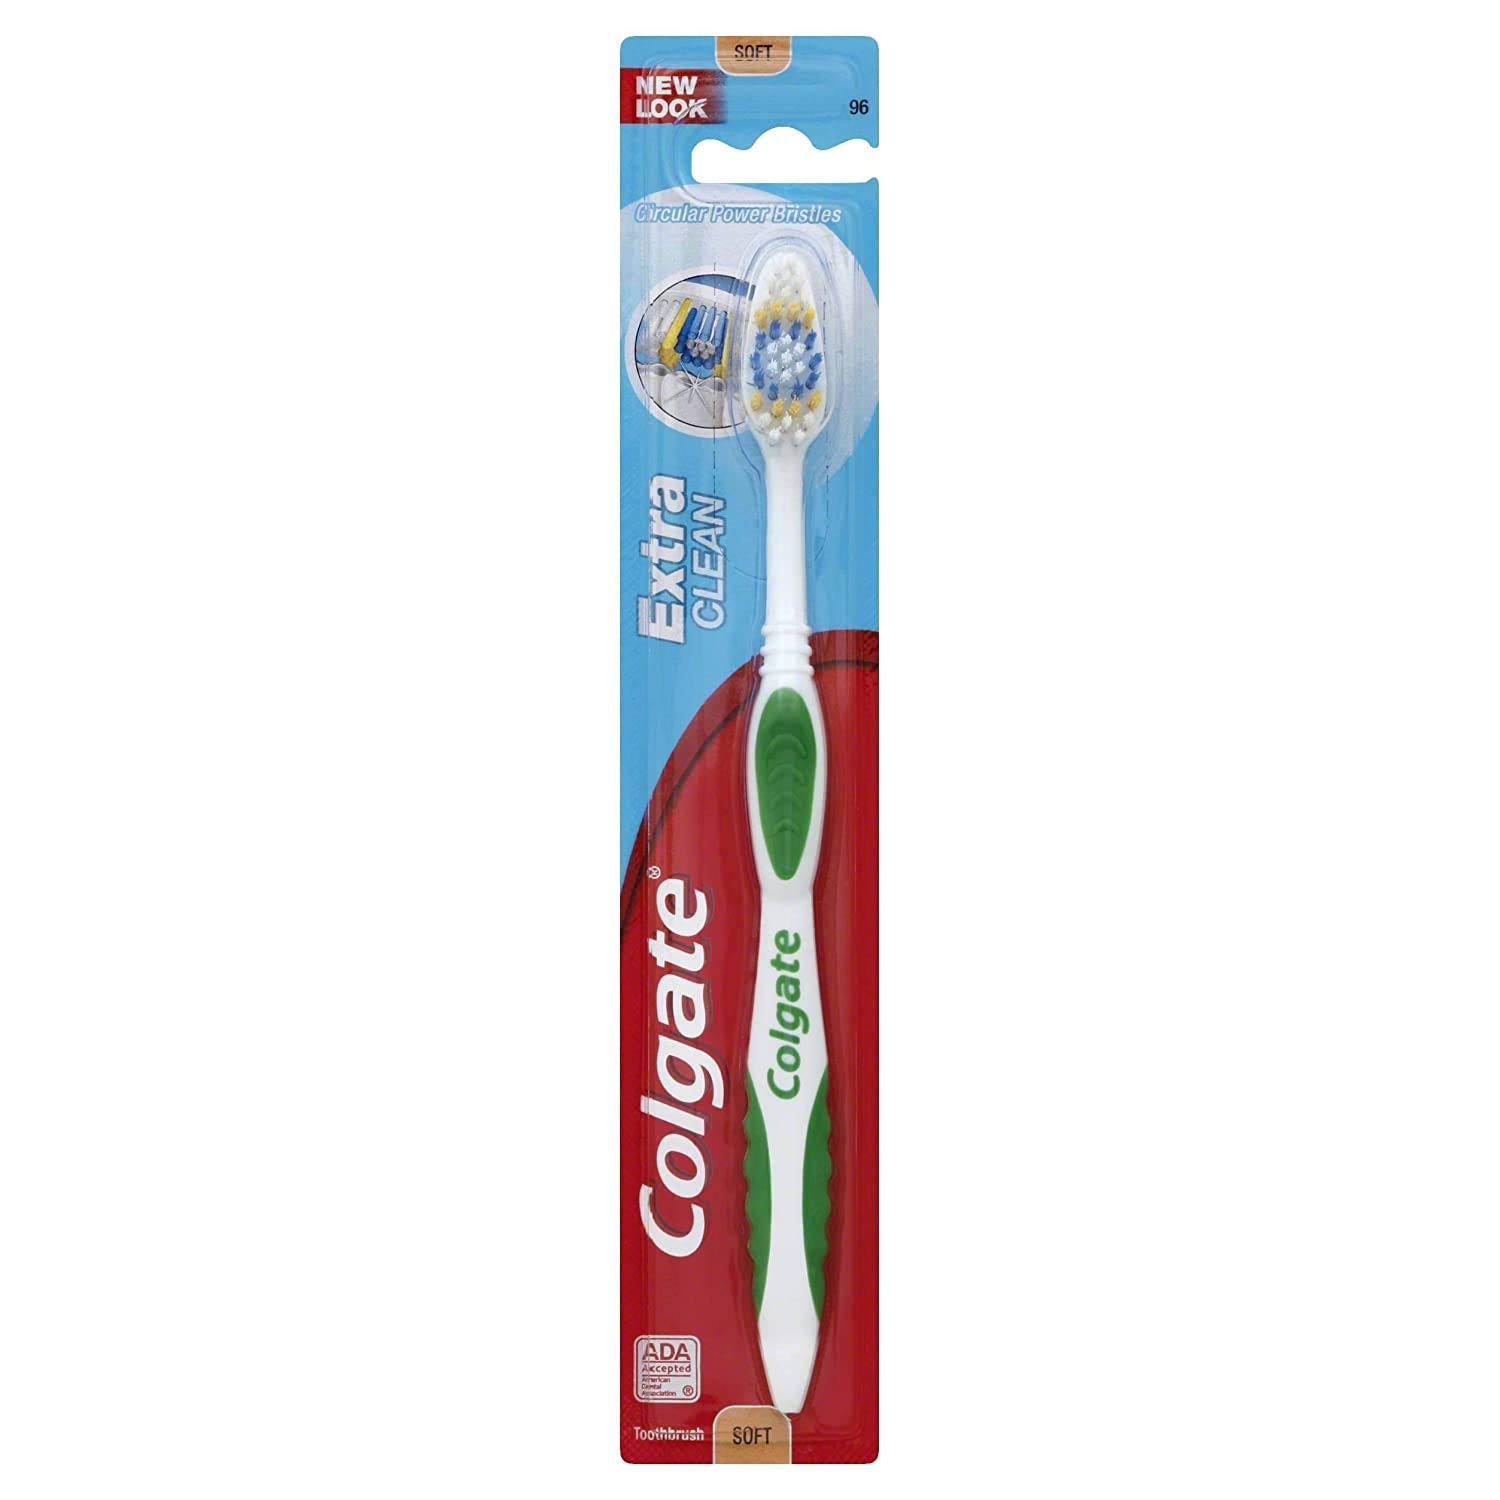 Colgate Extra Clean Toothbrush - Soft